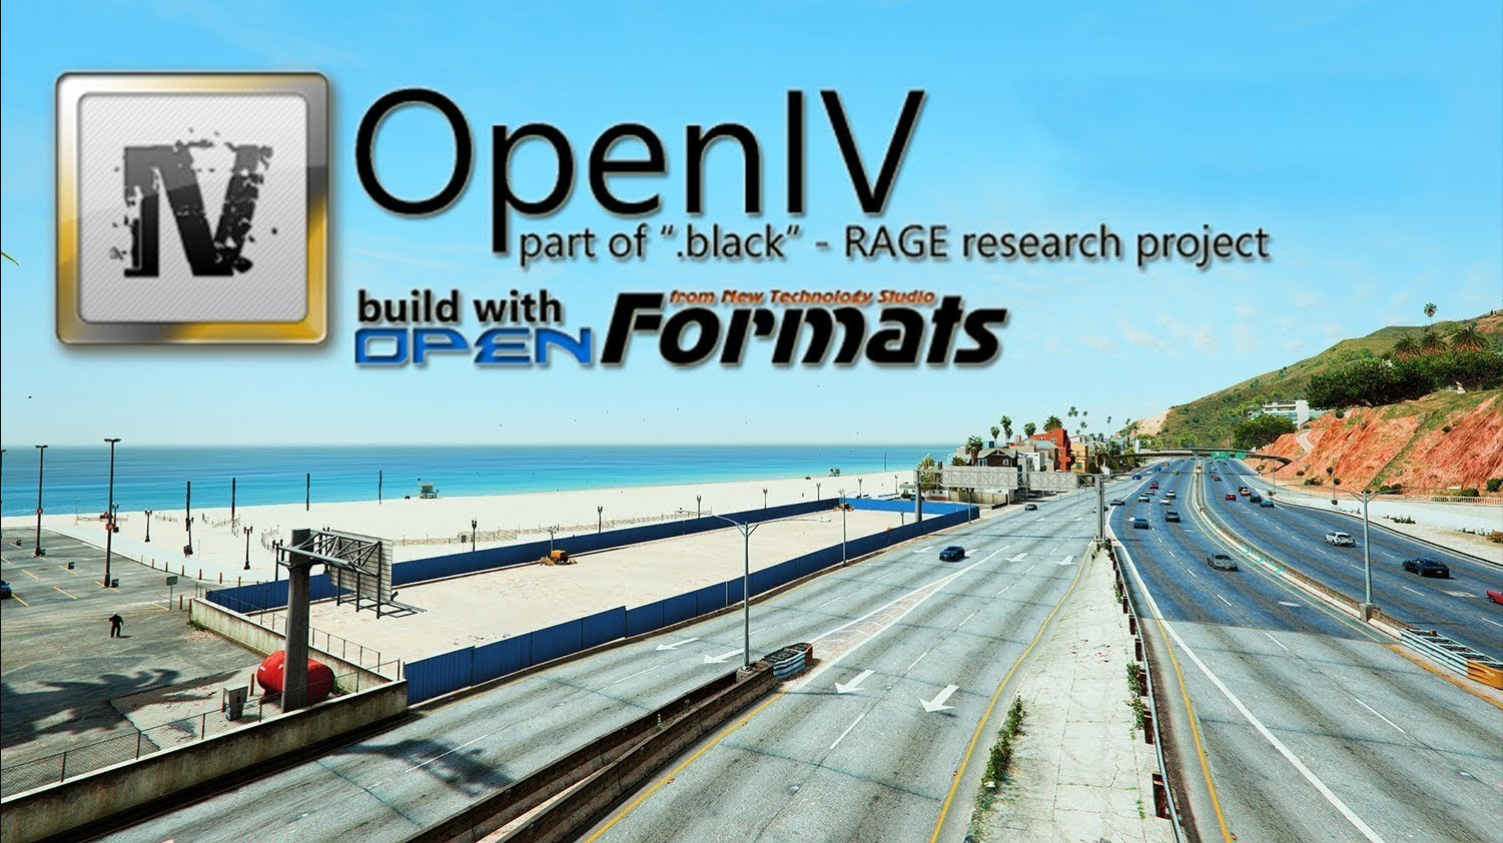 OpenIV MOD installer - Build with open formats